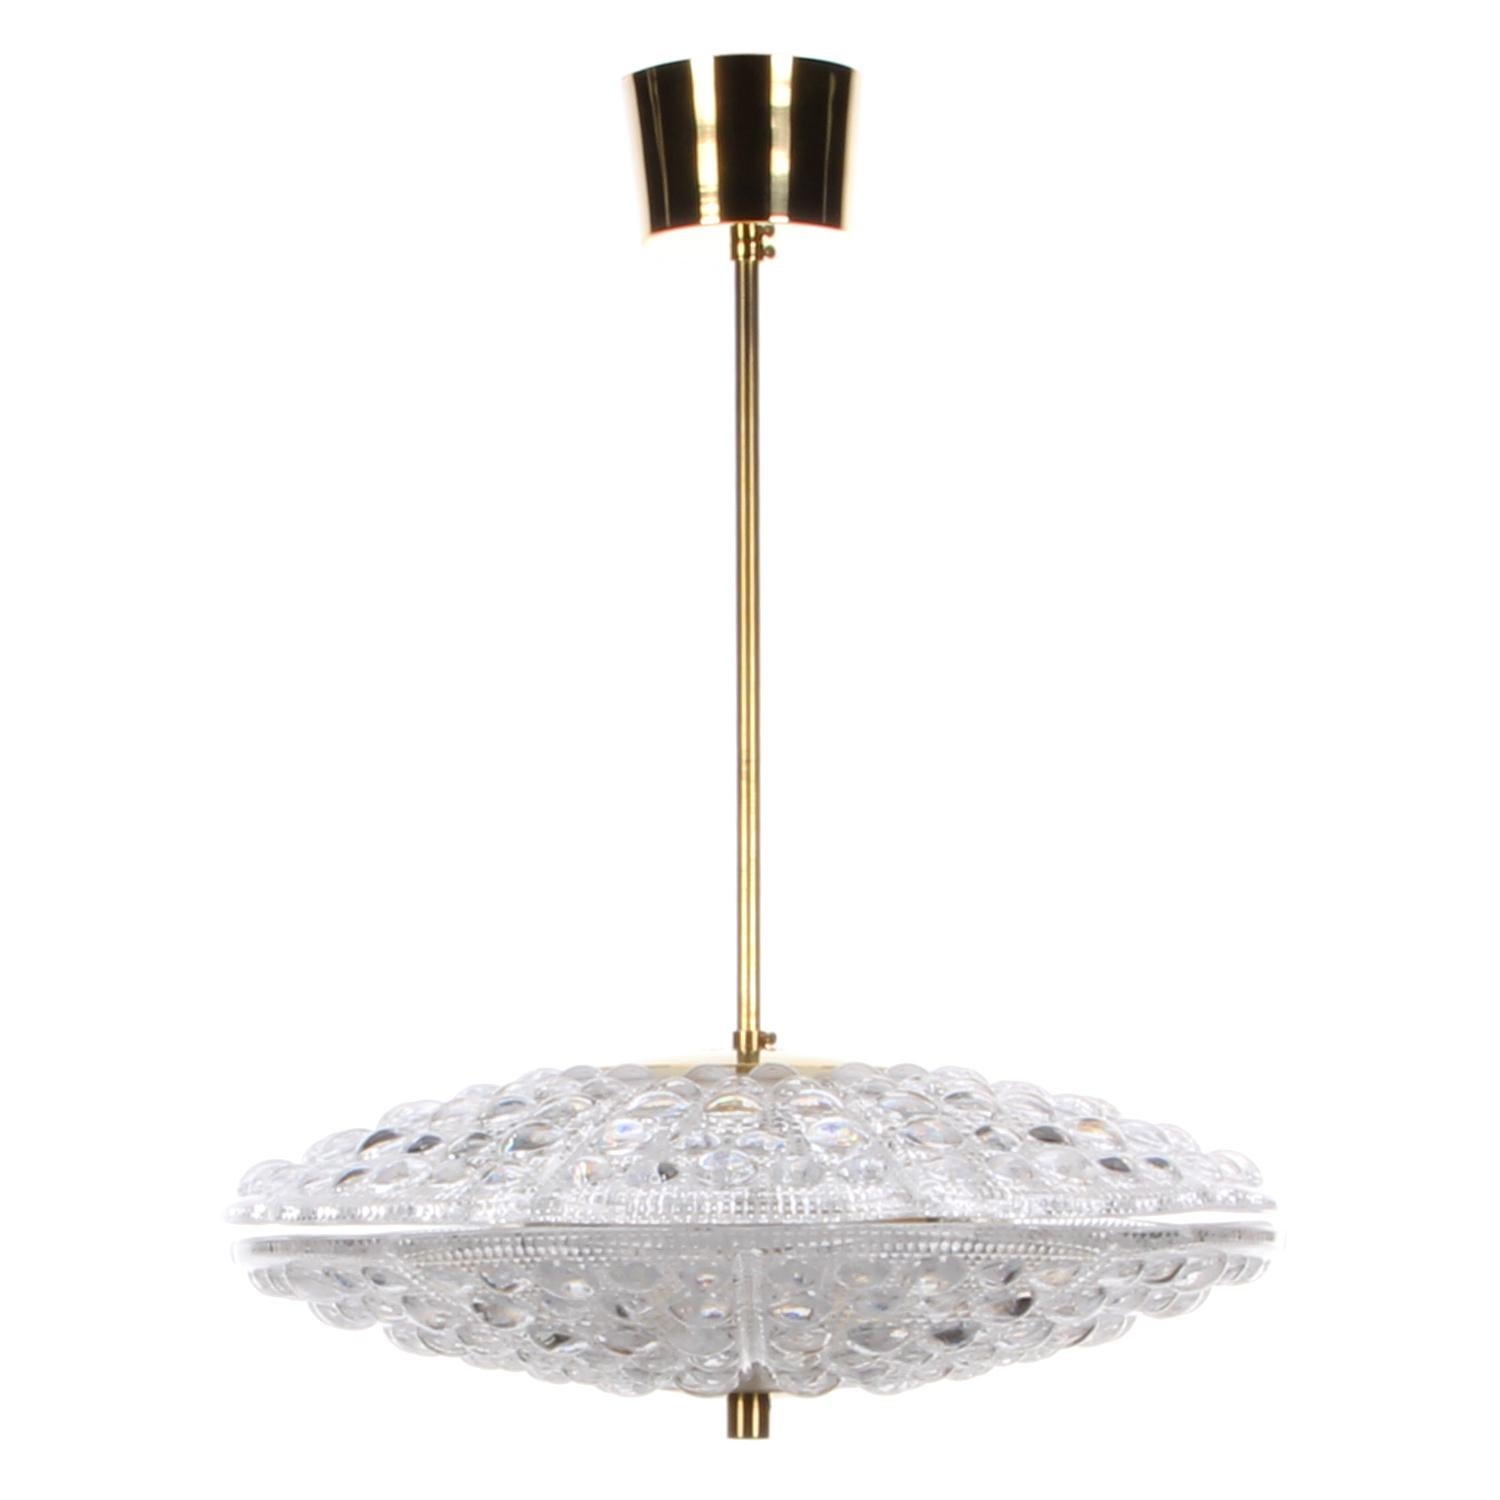 Orrefors Merkur, crystal pendant light by Carl Fagerlund (presumed) for LYFA/Orrefors in the 1960s - gorgeous Scandinavian lamp with crystal glass and brass, in excellent vintage condition.

An impressive crystal lamp comprised of two thick double